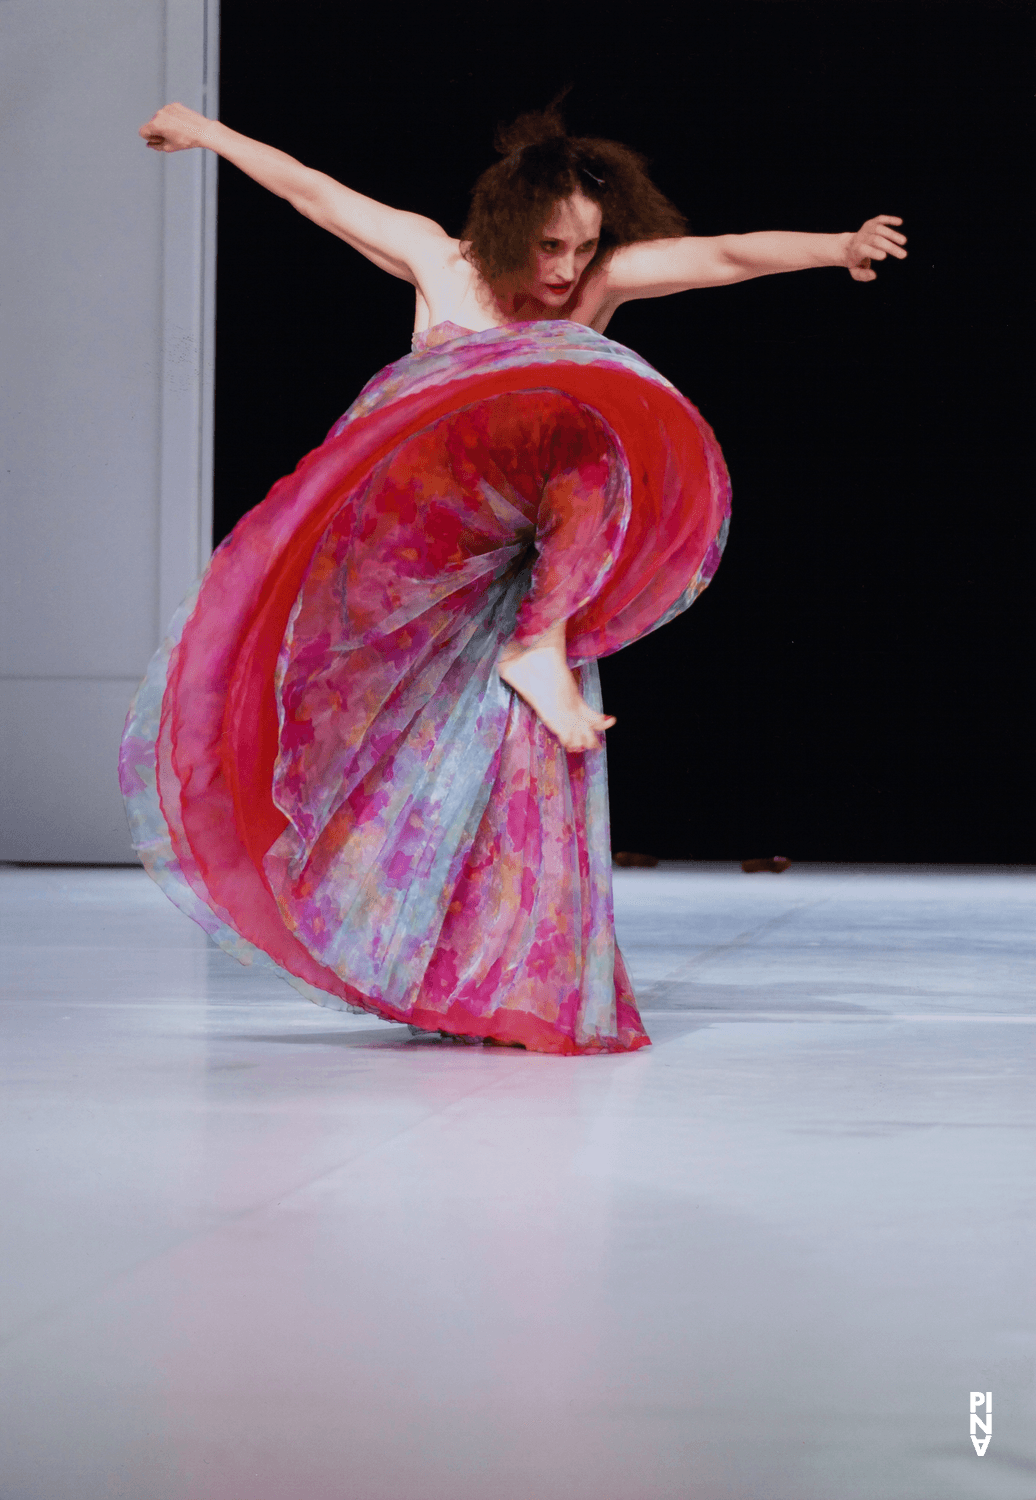 Nazareth Panadero in “For the Children of Yesterday, Today and Tomorrow” by Pina Bausch